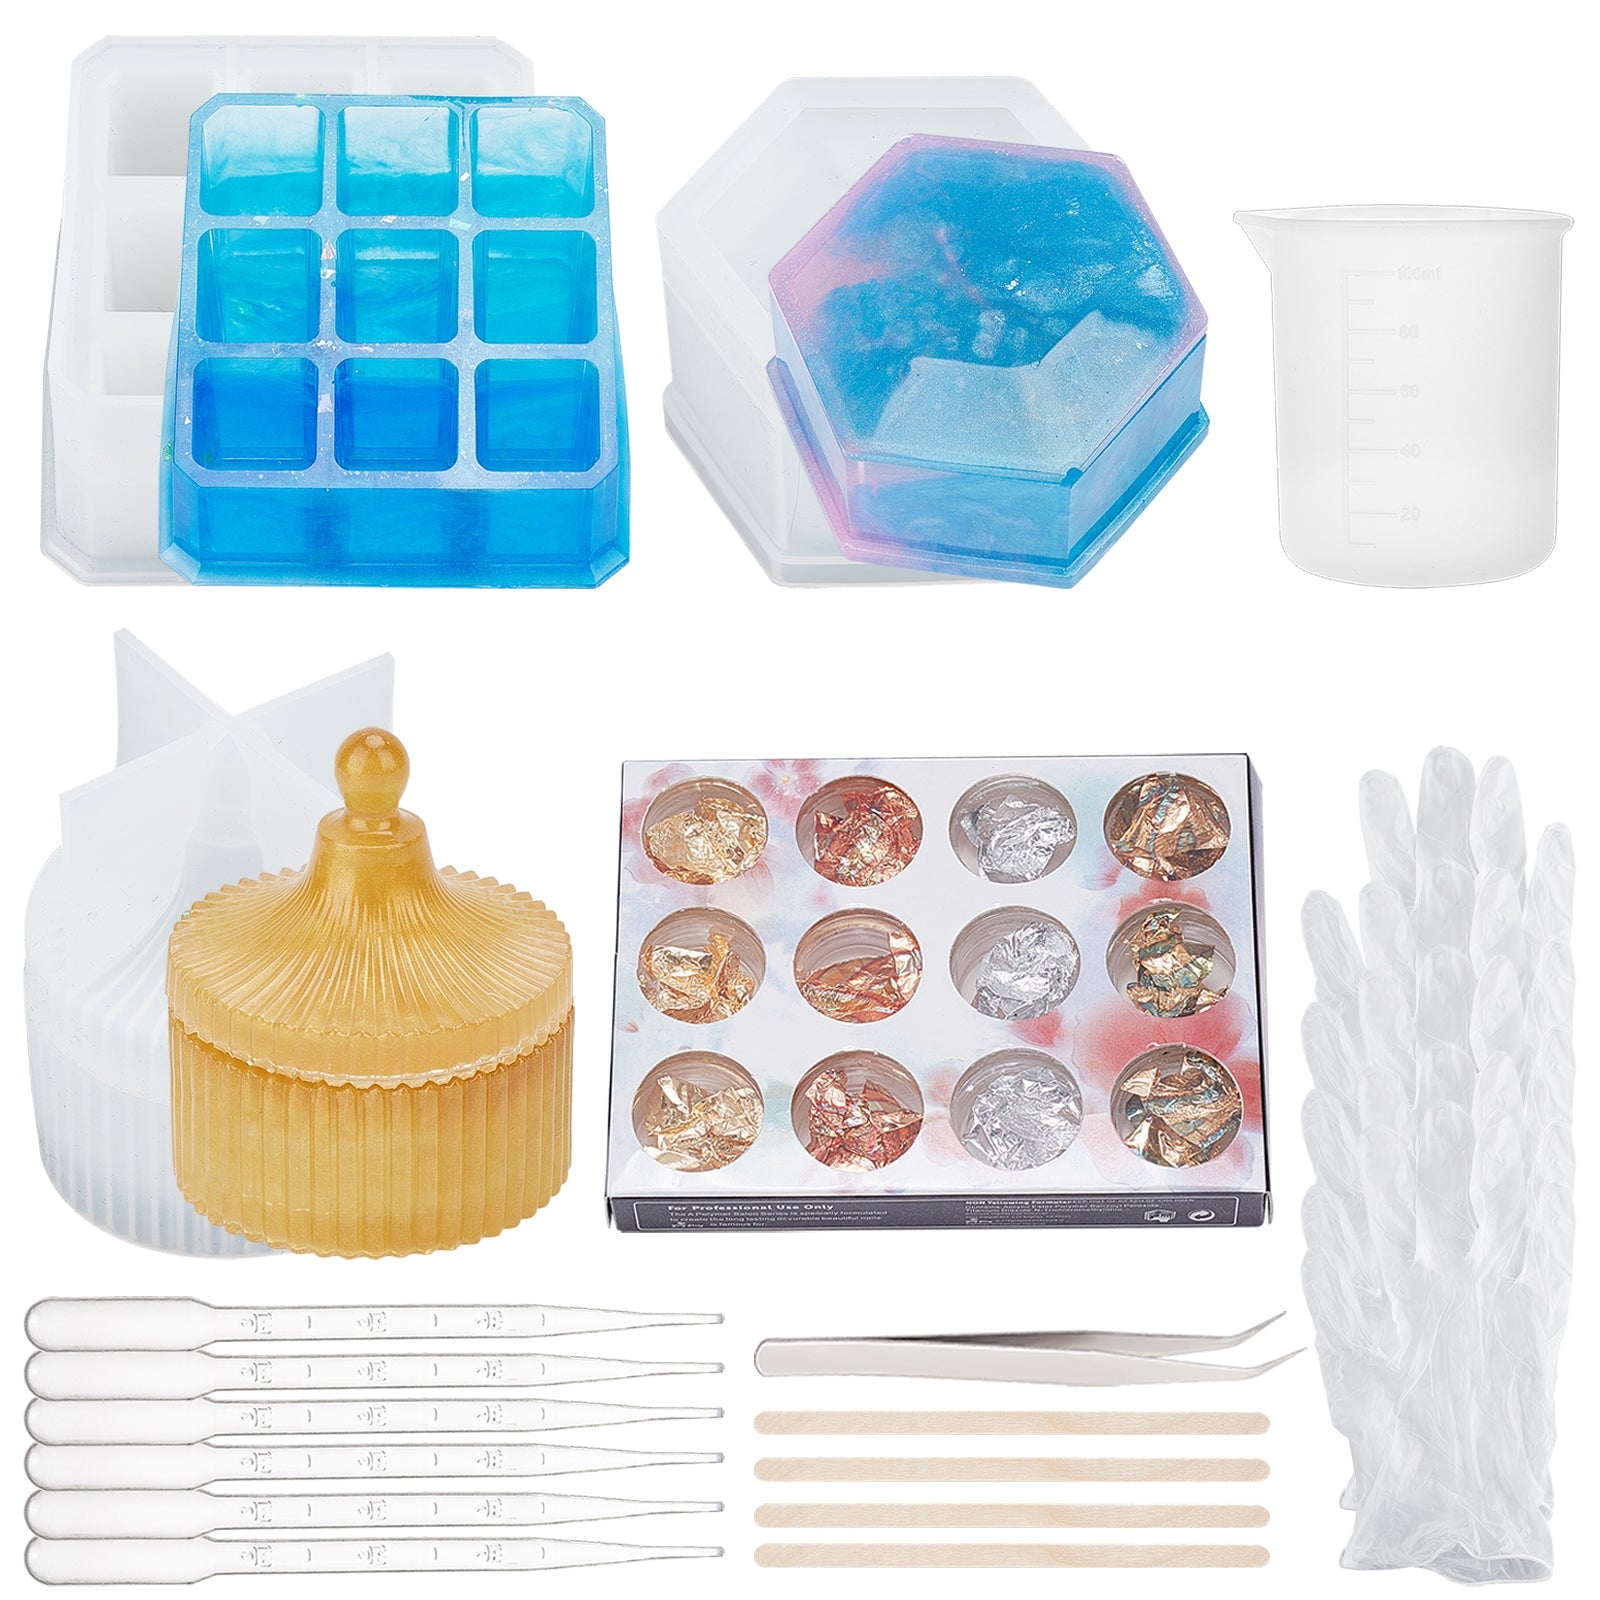  Ice Cube Tray With Lid and Storage Bin - Silicone 36